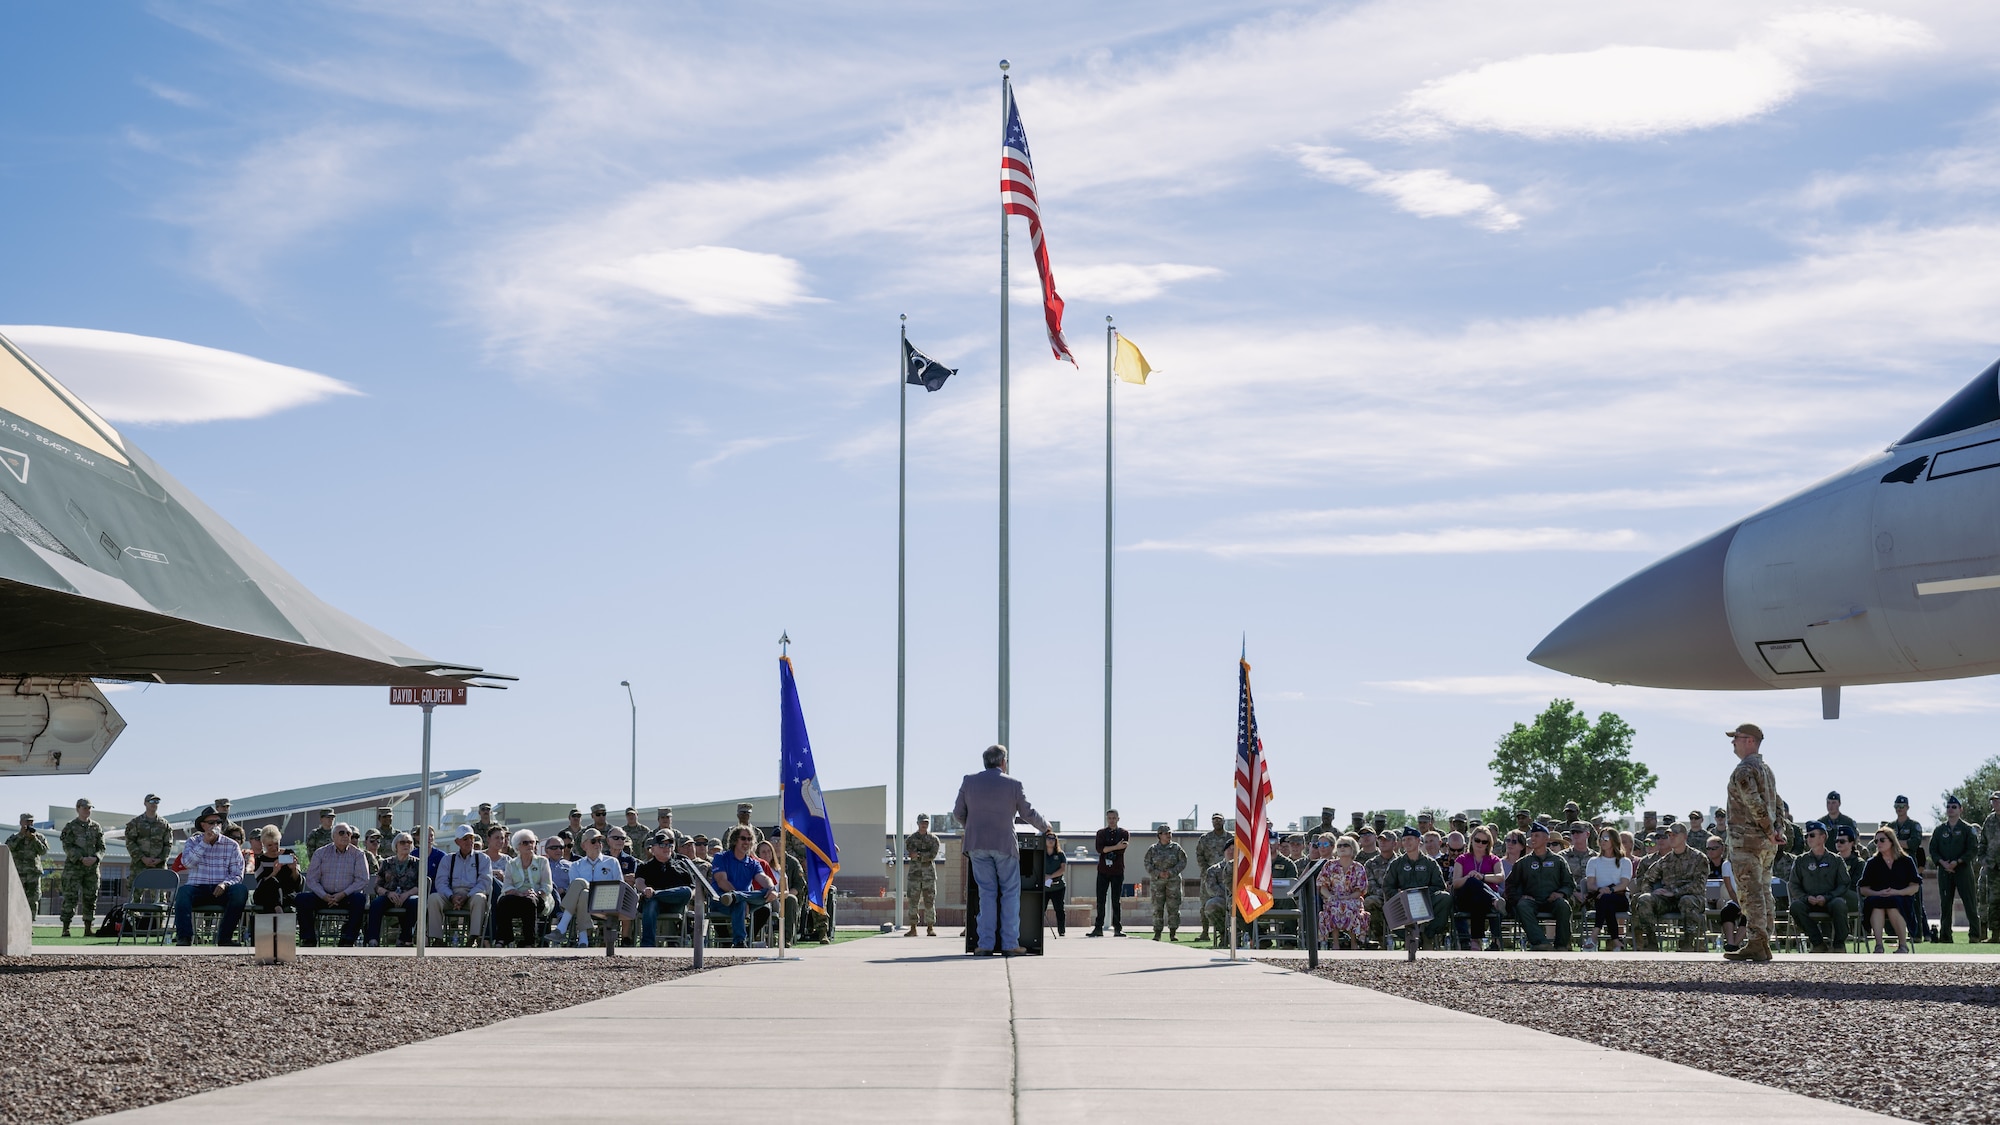 Community members and personnel from the 49th Wing congratulate retired U.S. Air Force Gen. David L. Goldfein during a street renaming ceremony at Holloman Air Force Base, New Mexico, Sept. 22, 2023. A street here was renamed to honor the 21st Chief of Staff of the U.S. Air Force and previous Holloman commander, U.S. Air Force Gen. David L. Goldfein. (U.S. Air Force photo by Senior Airman Antonio Salfran)